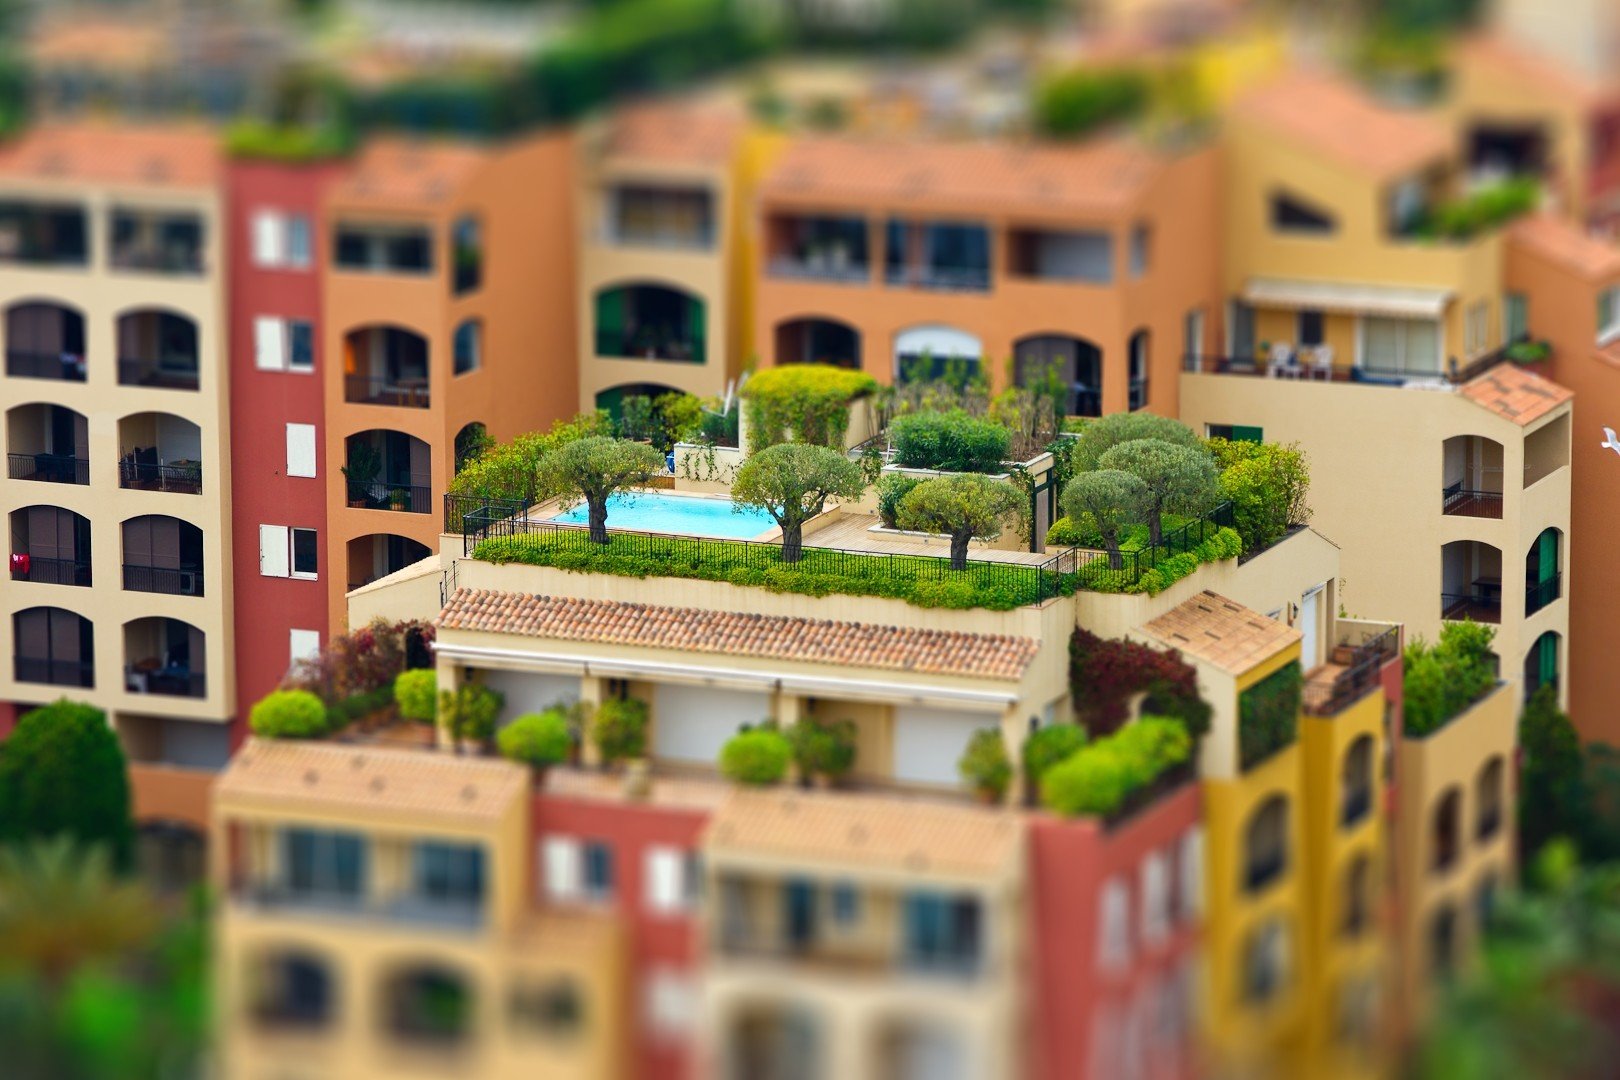 architecture, House, Tilt shift, Town, Trees, Rooftops, Arch, Window, Colorful, Swimming pool Wallpaper